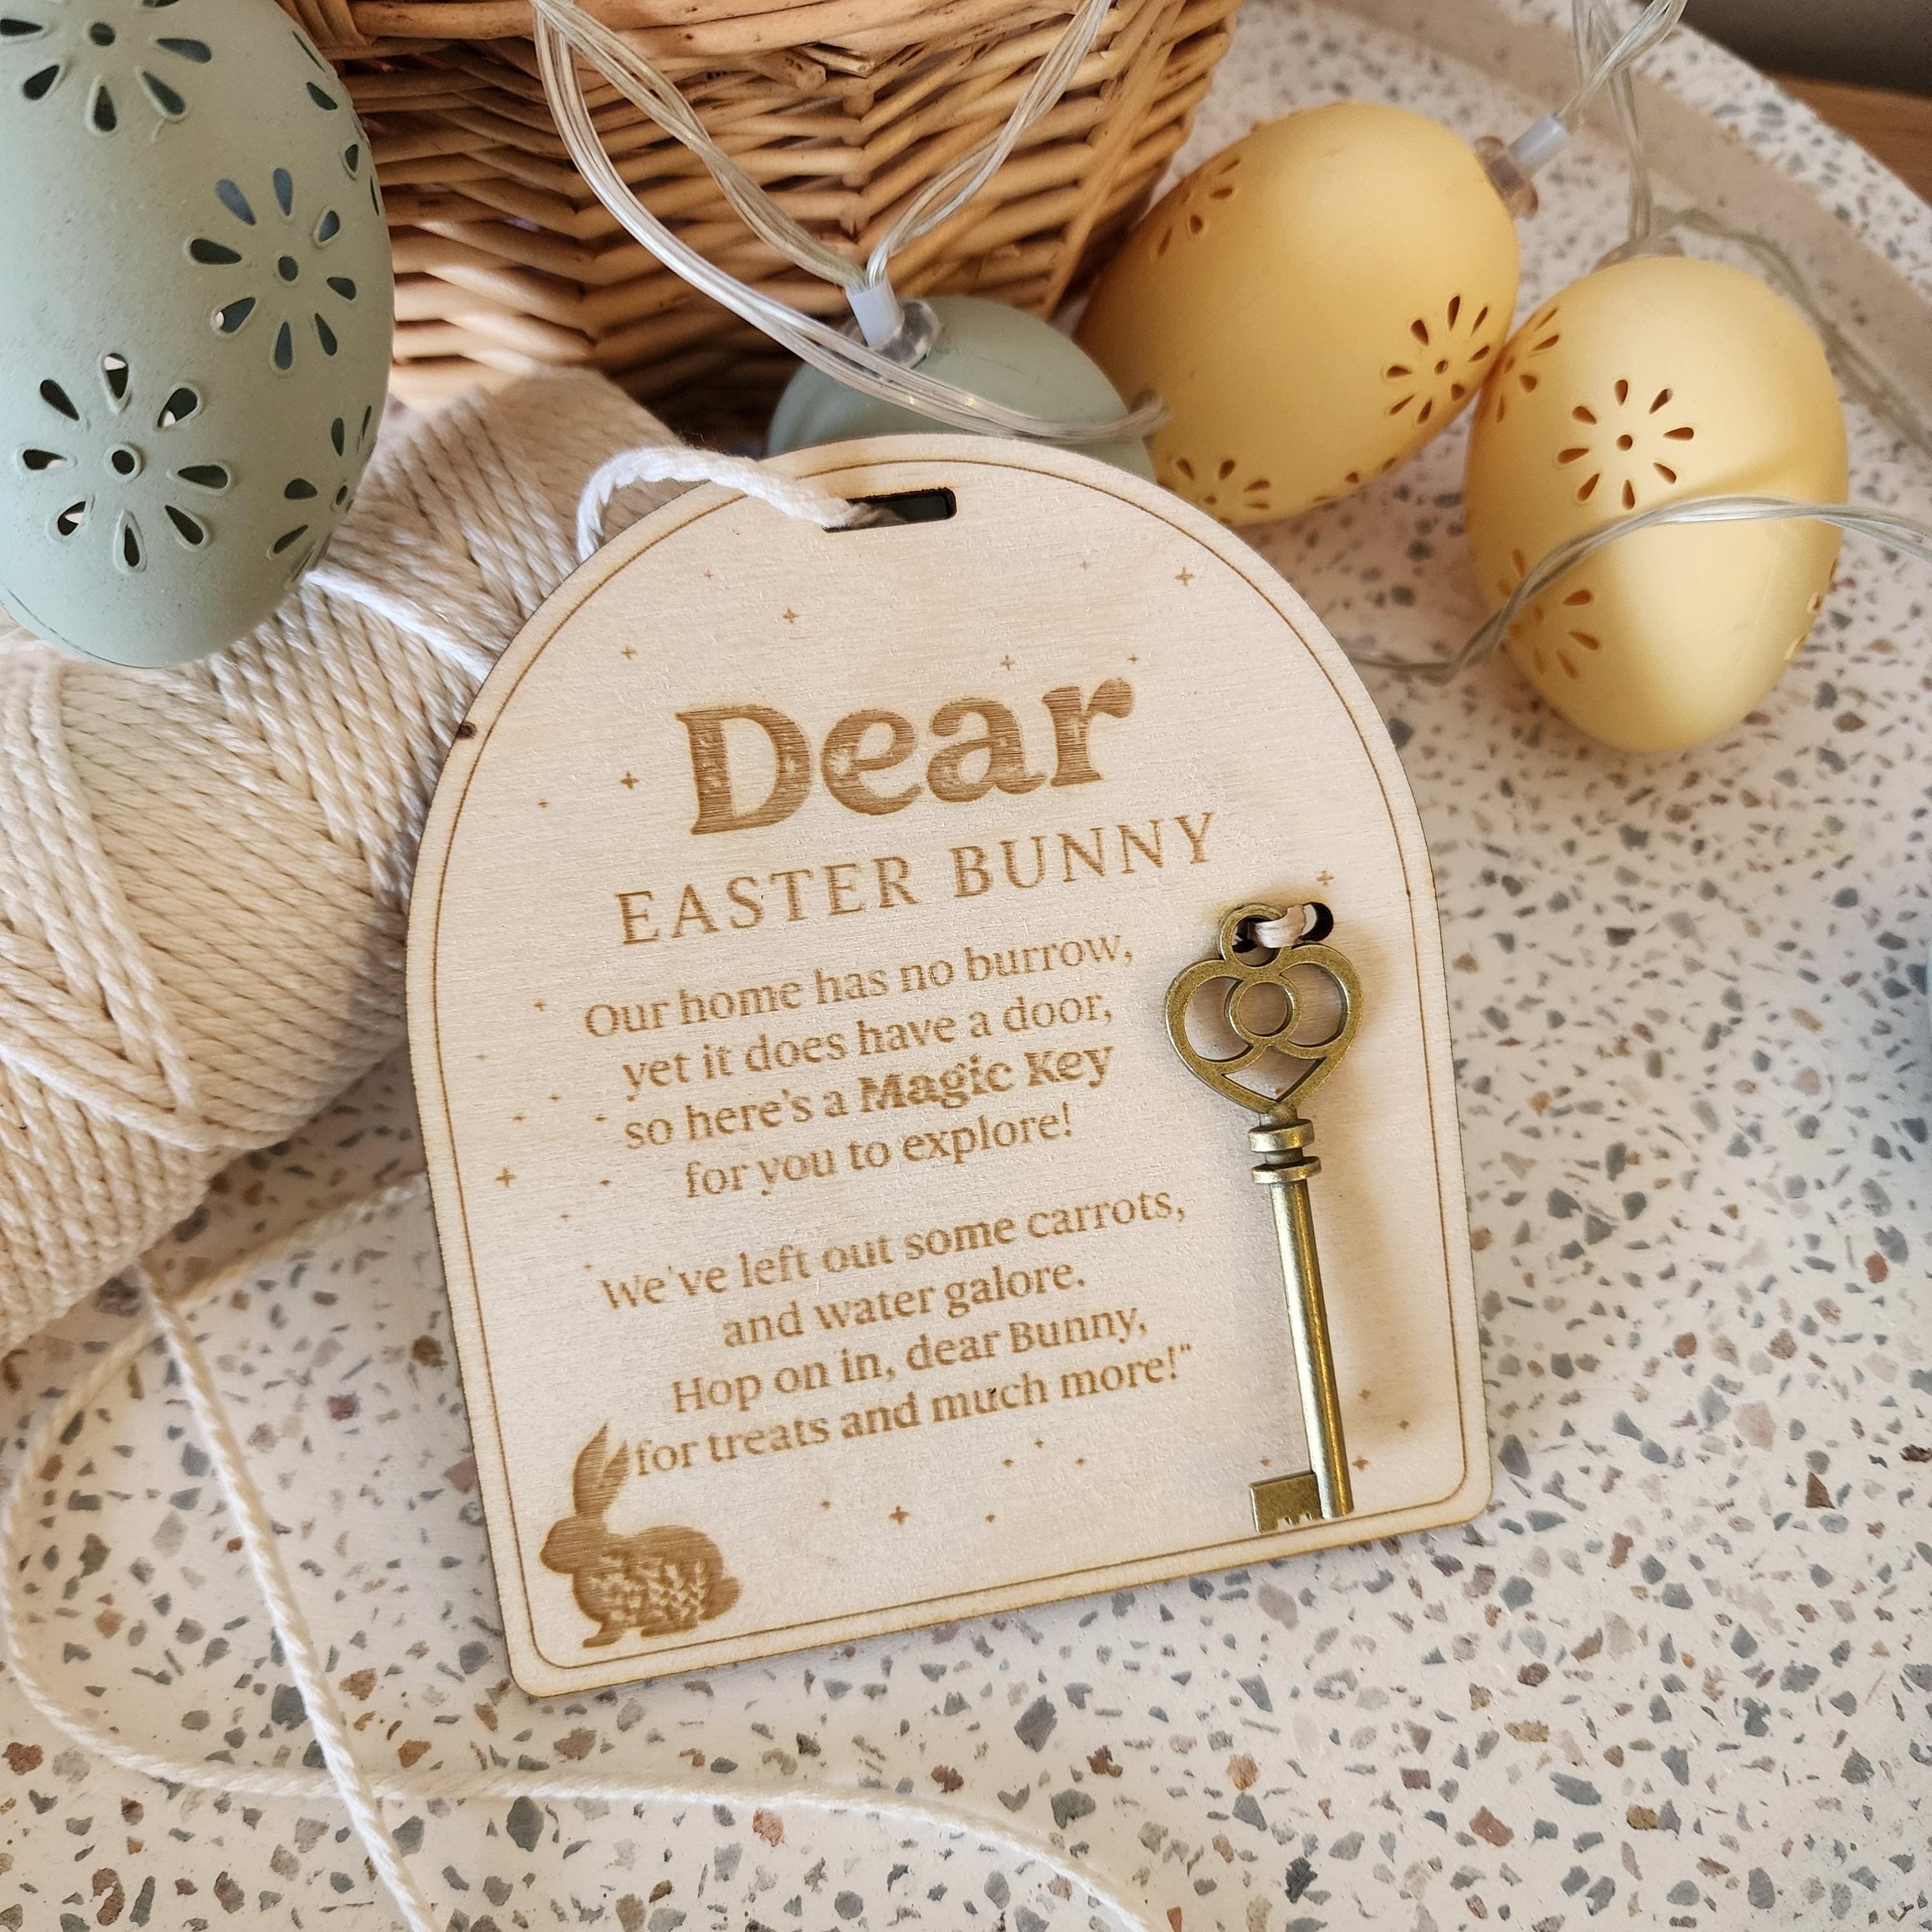 "Dear Easter Bunny" Magic Key - Enchanted Access for Special Visits - The Willow Corner